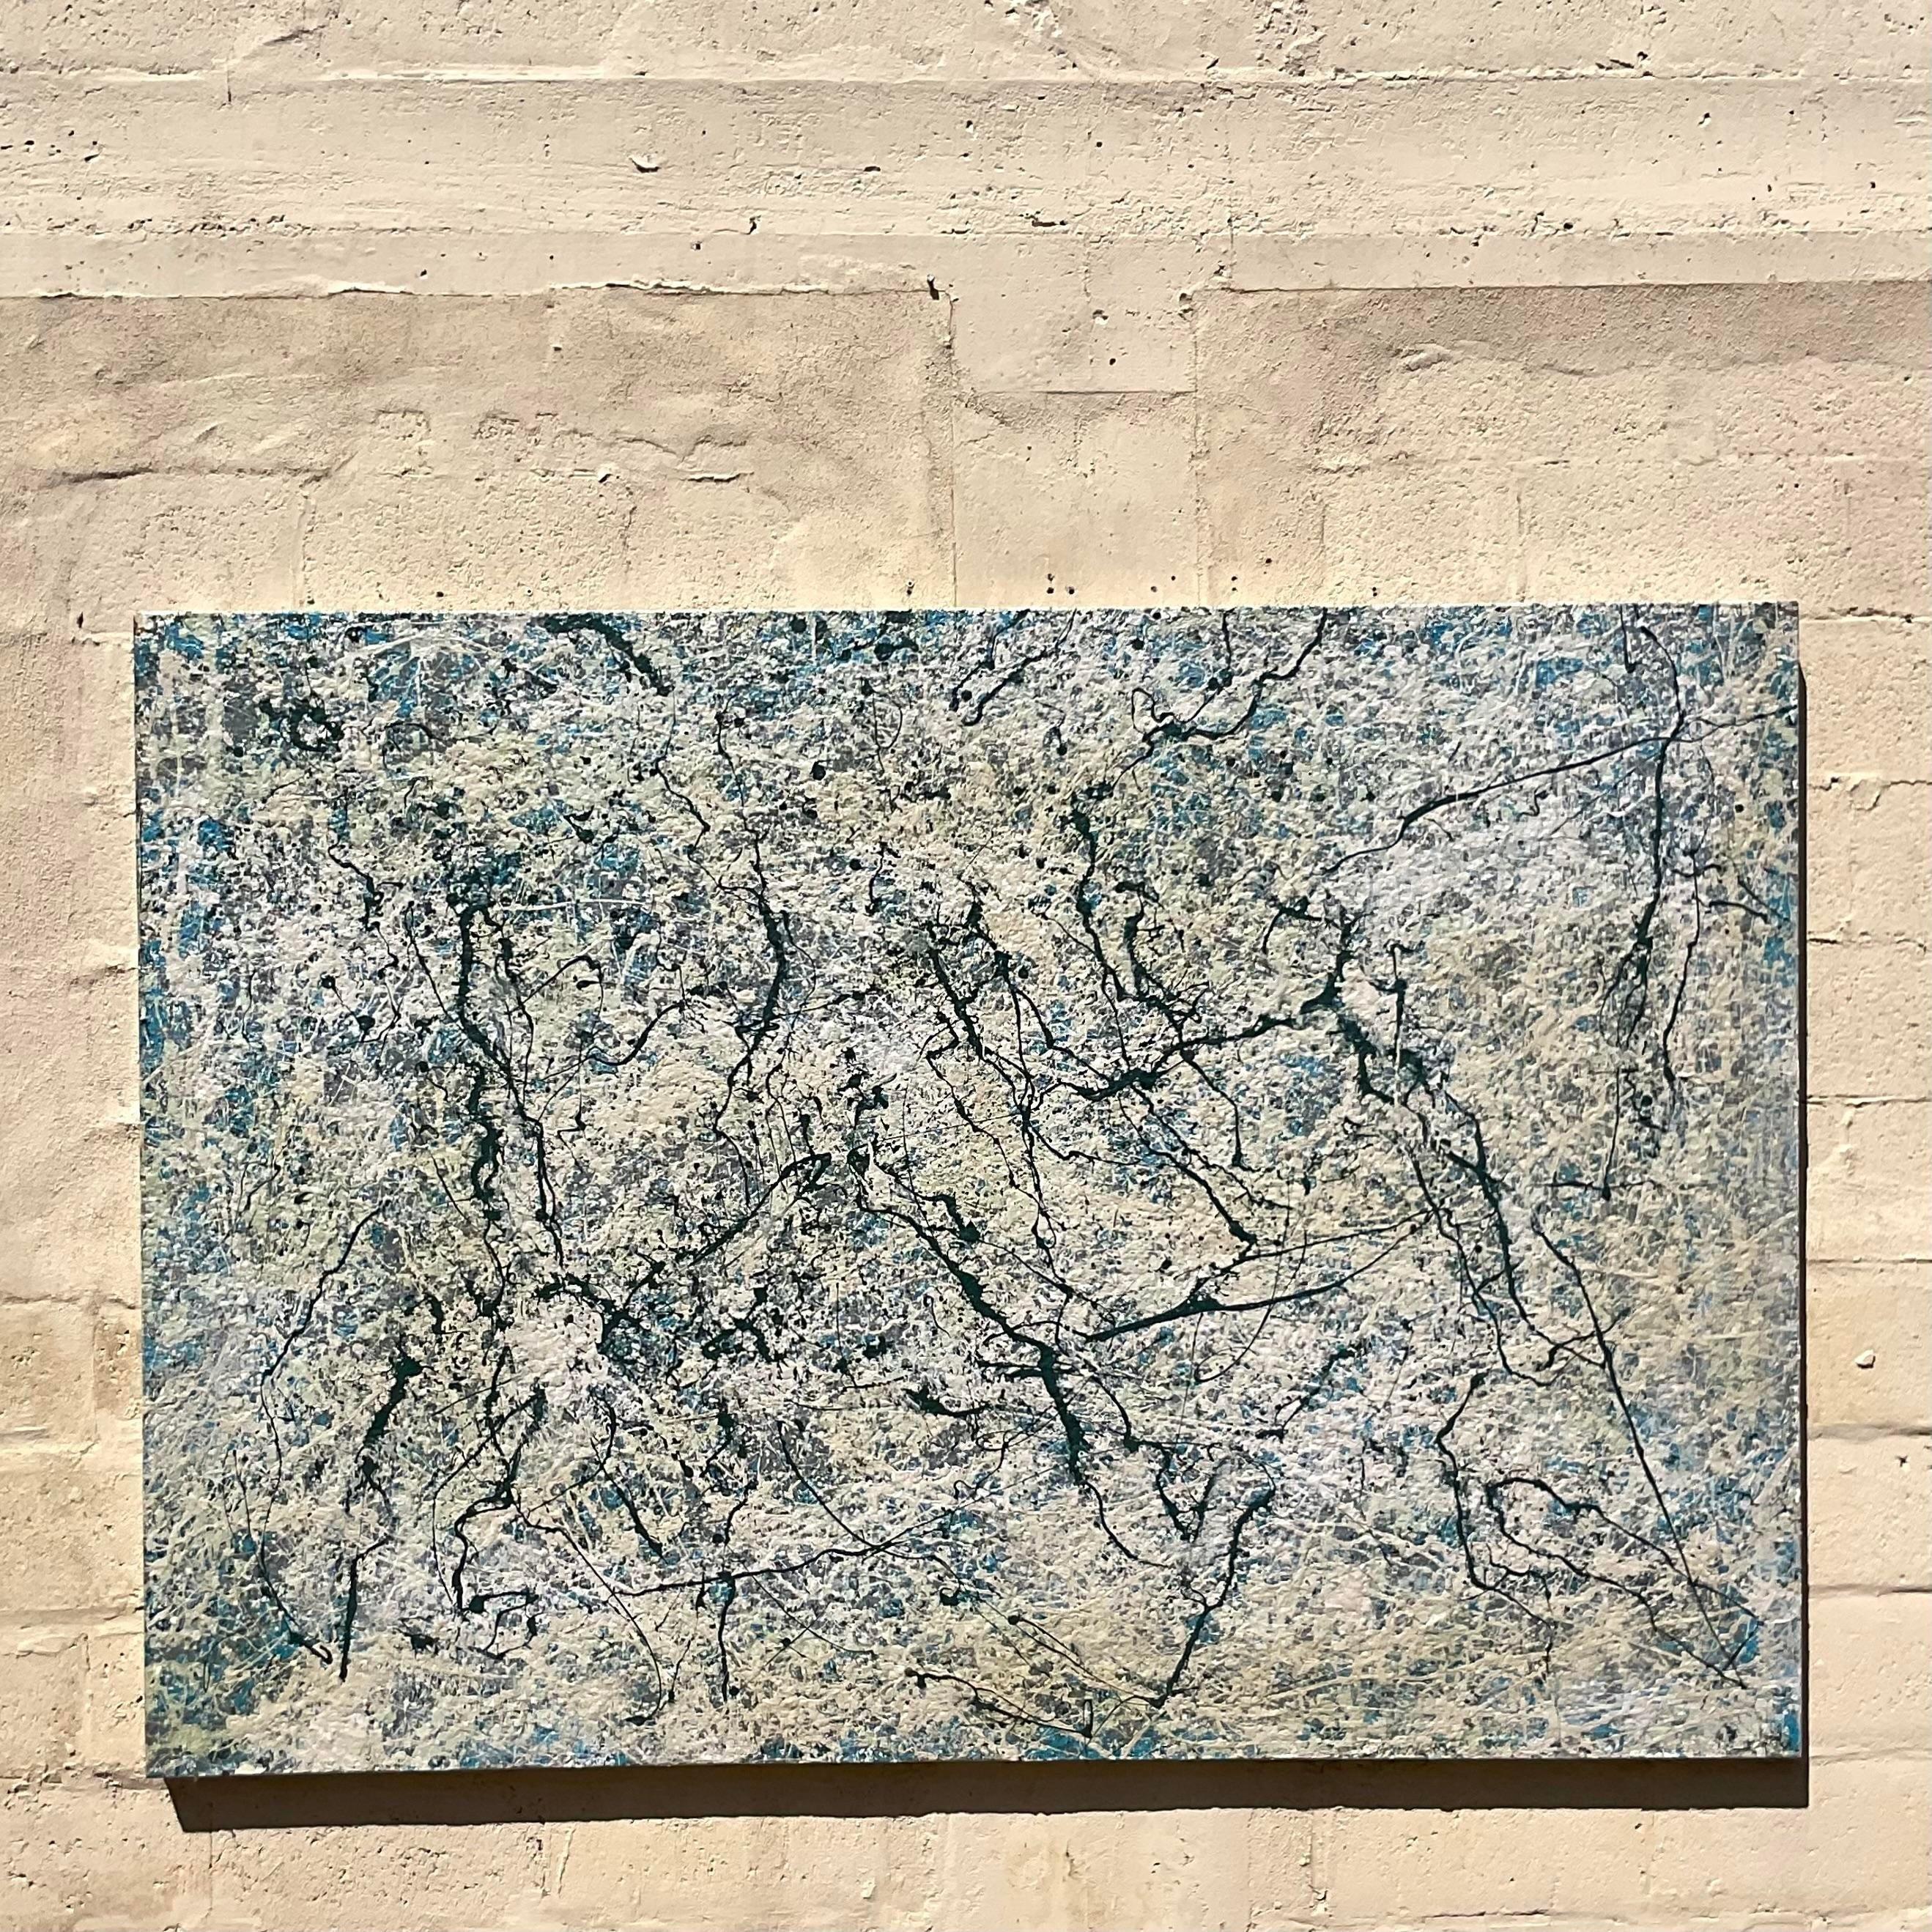 This vintage abstract uses differentiating shades of blues and soft pinks with black branching throughout. This creates a subtle yet bold painting considering the intricacy in color and texture. Acquired from a Palm Beach estate